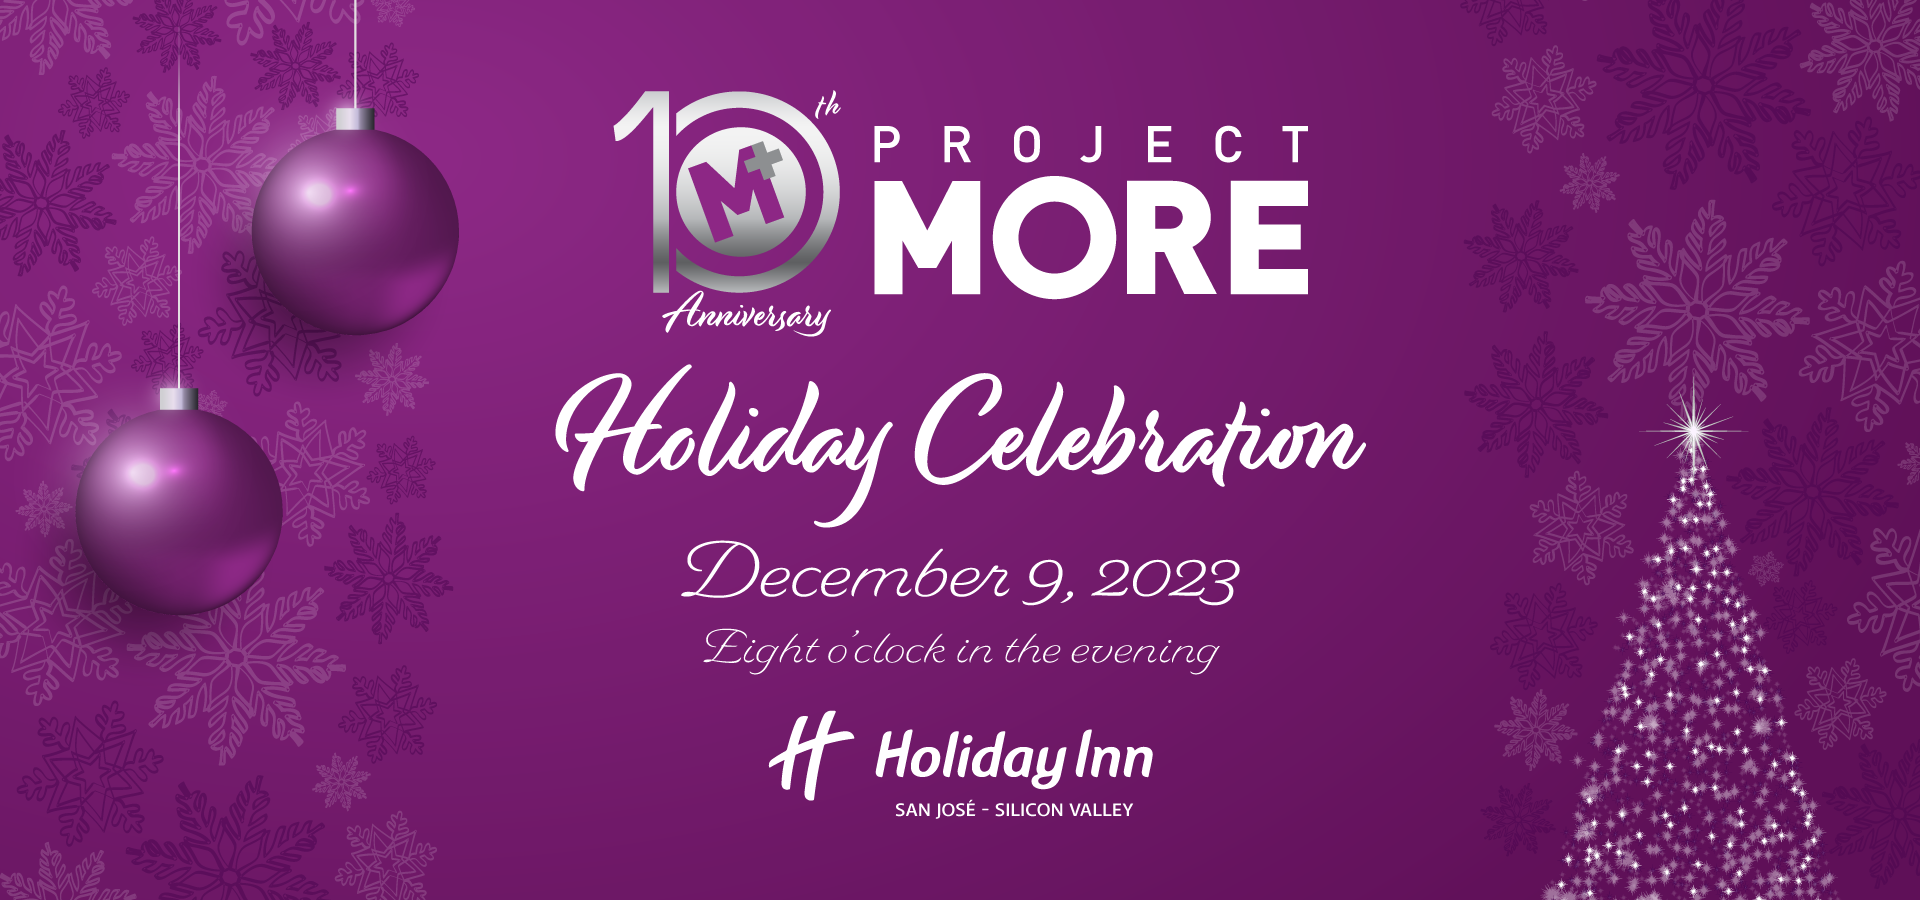 Project MORE 10th Anniversary Holiday Celebration Slider